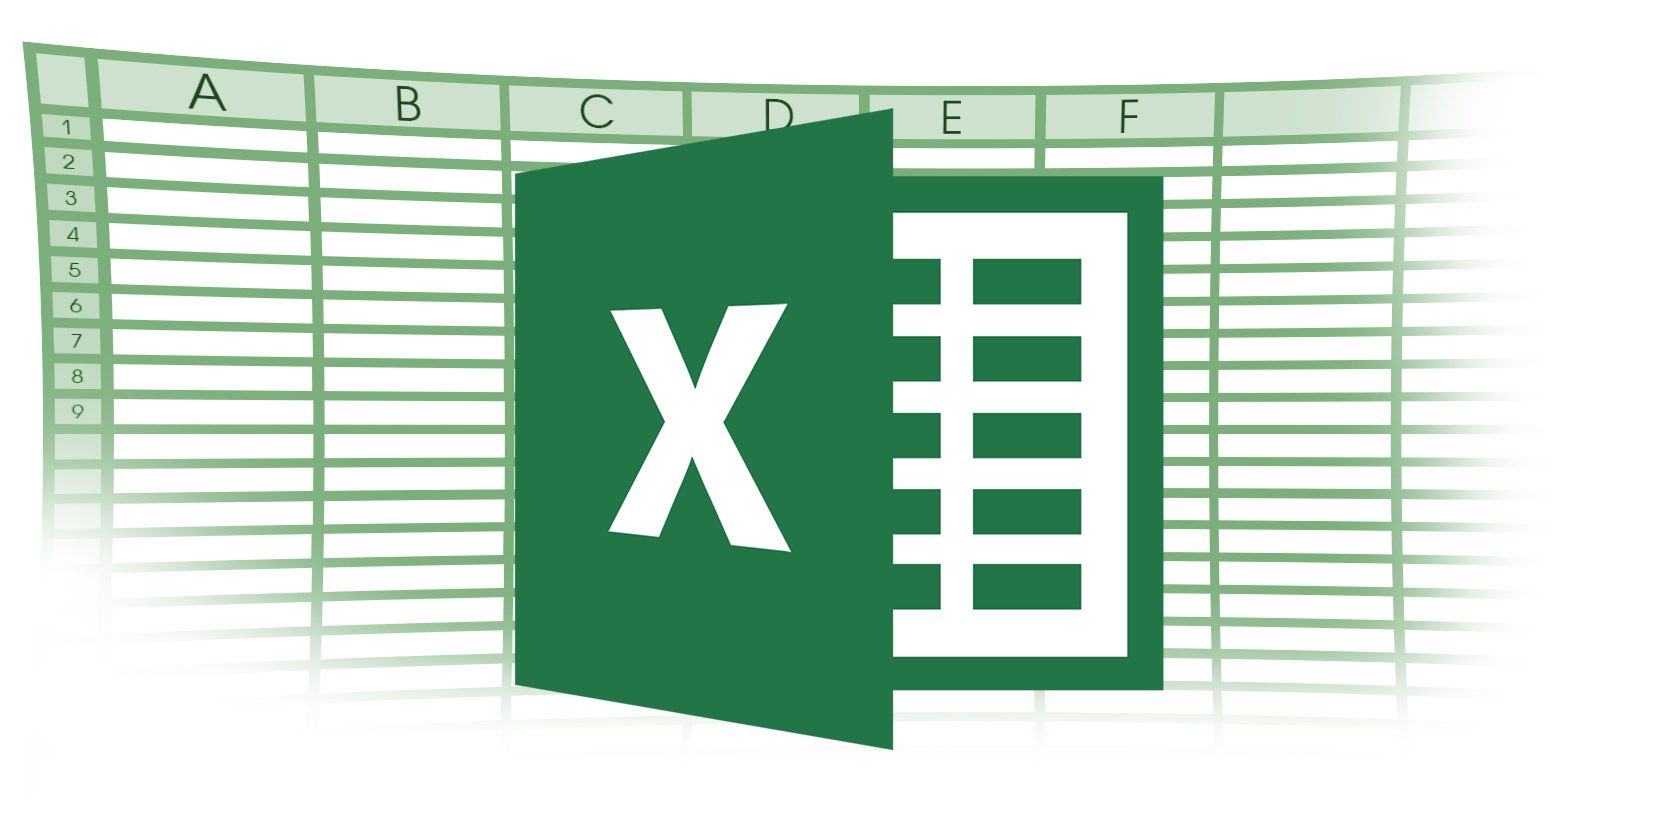 learning pivot tables in excel 2013